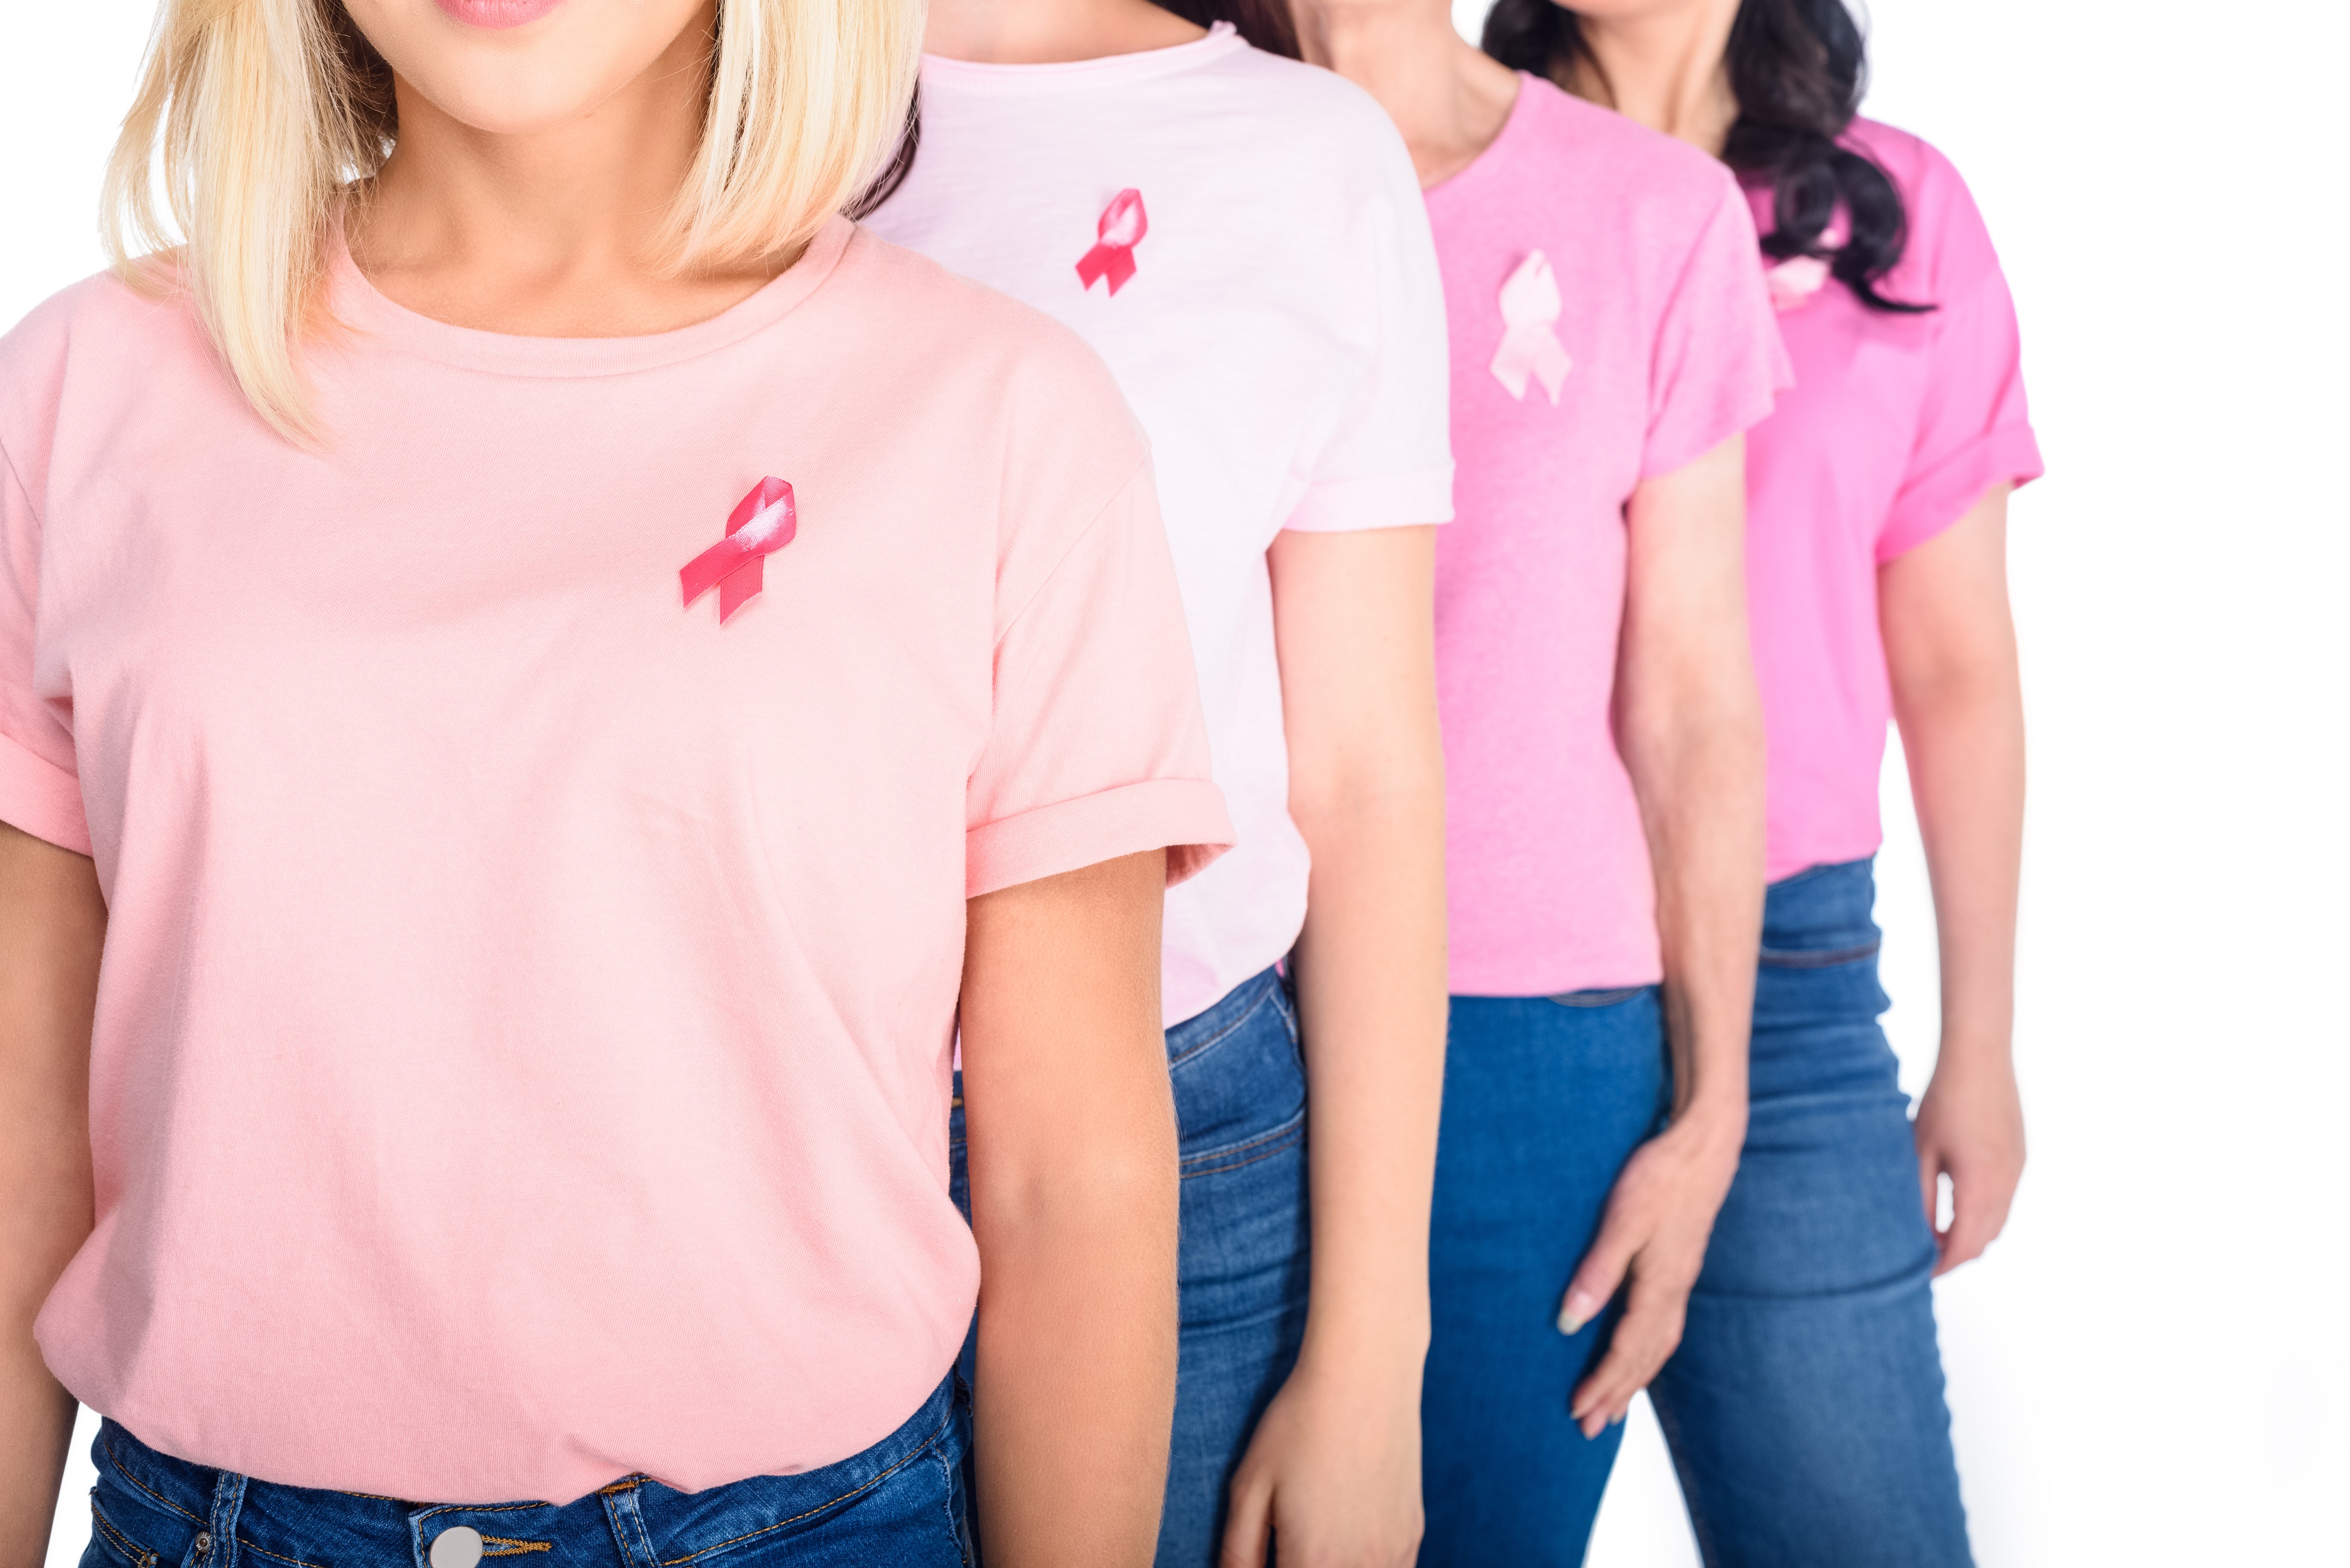 Research advances allow millions of women to receive better treatment, faster diagnoses and support. In the image, four women are standing with blue jeans and pink tops of different shades.